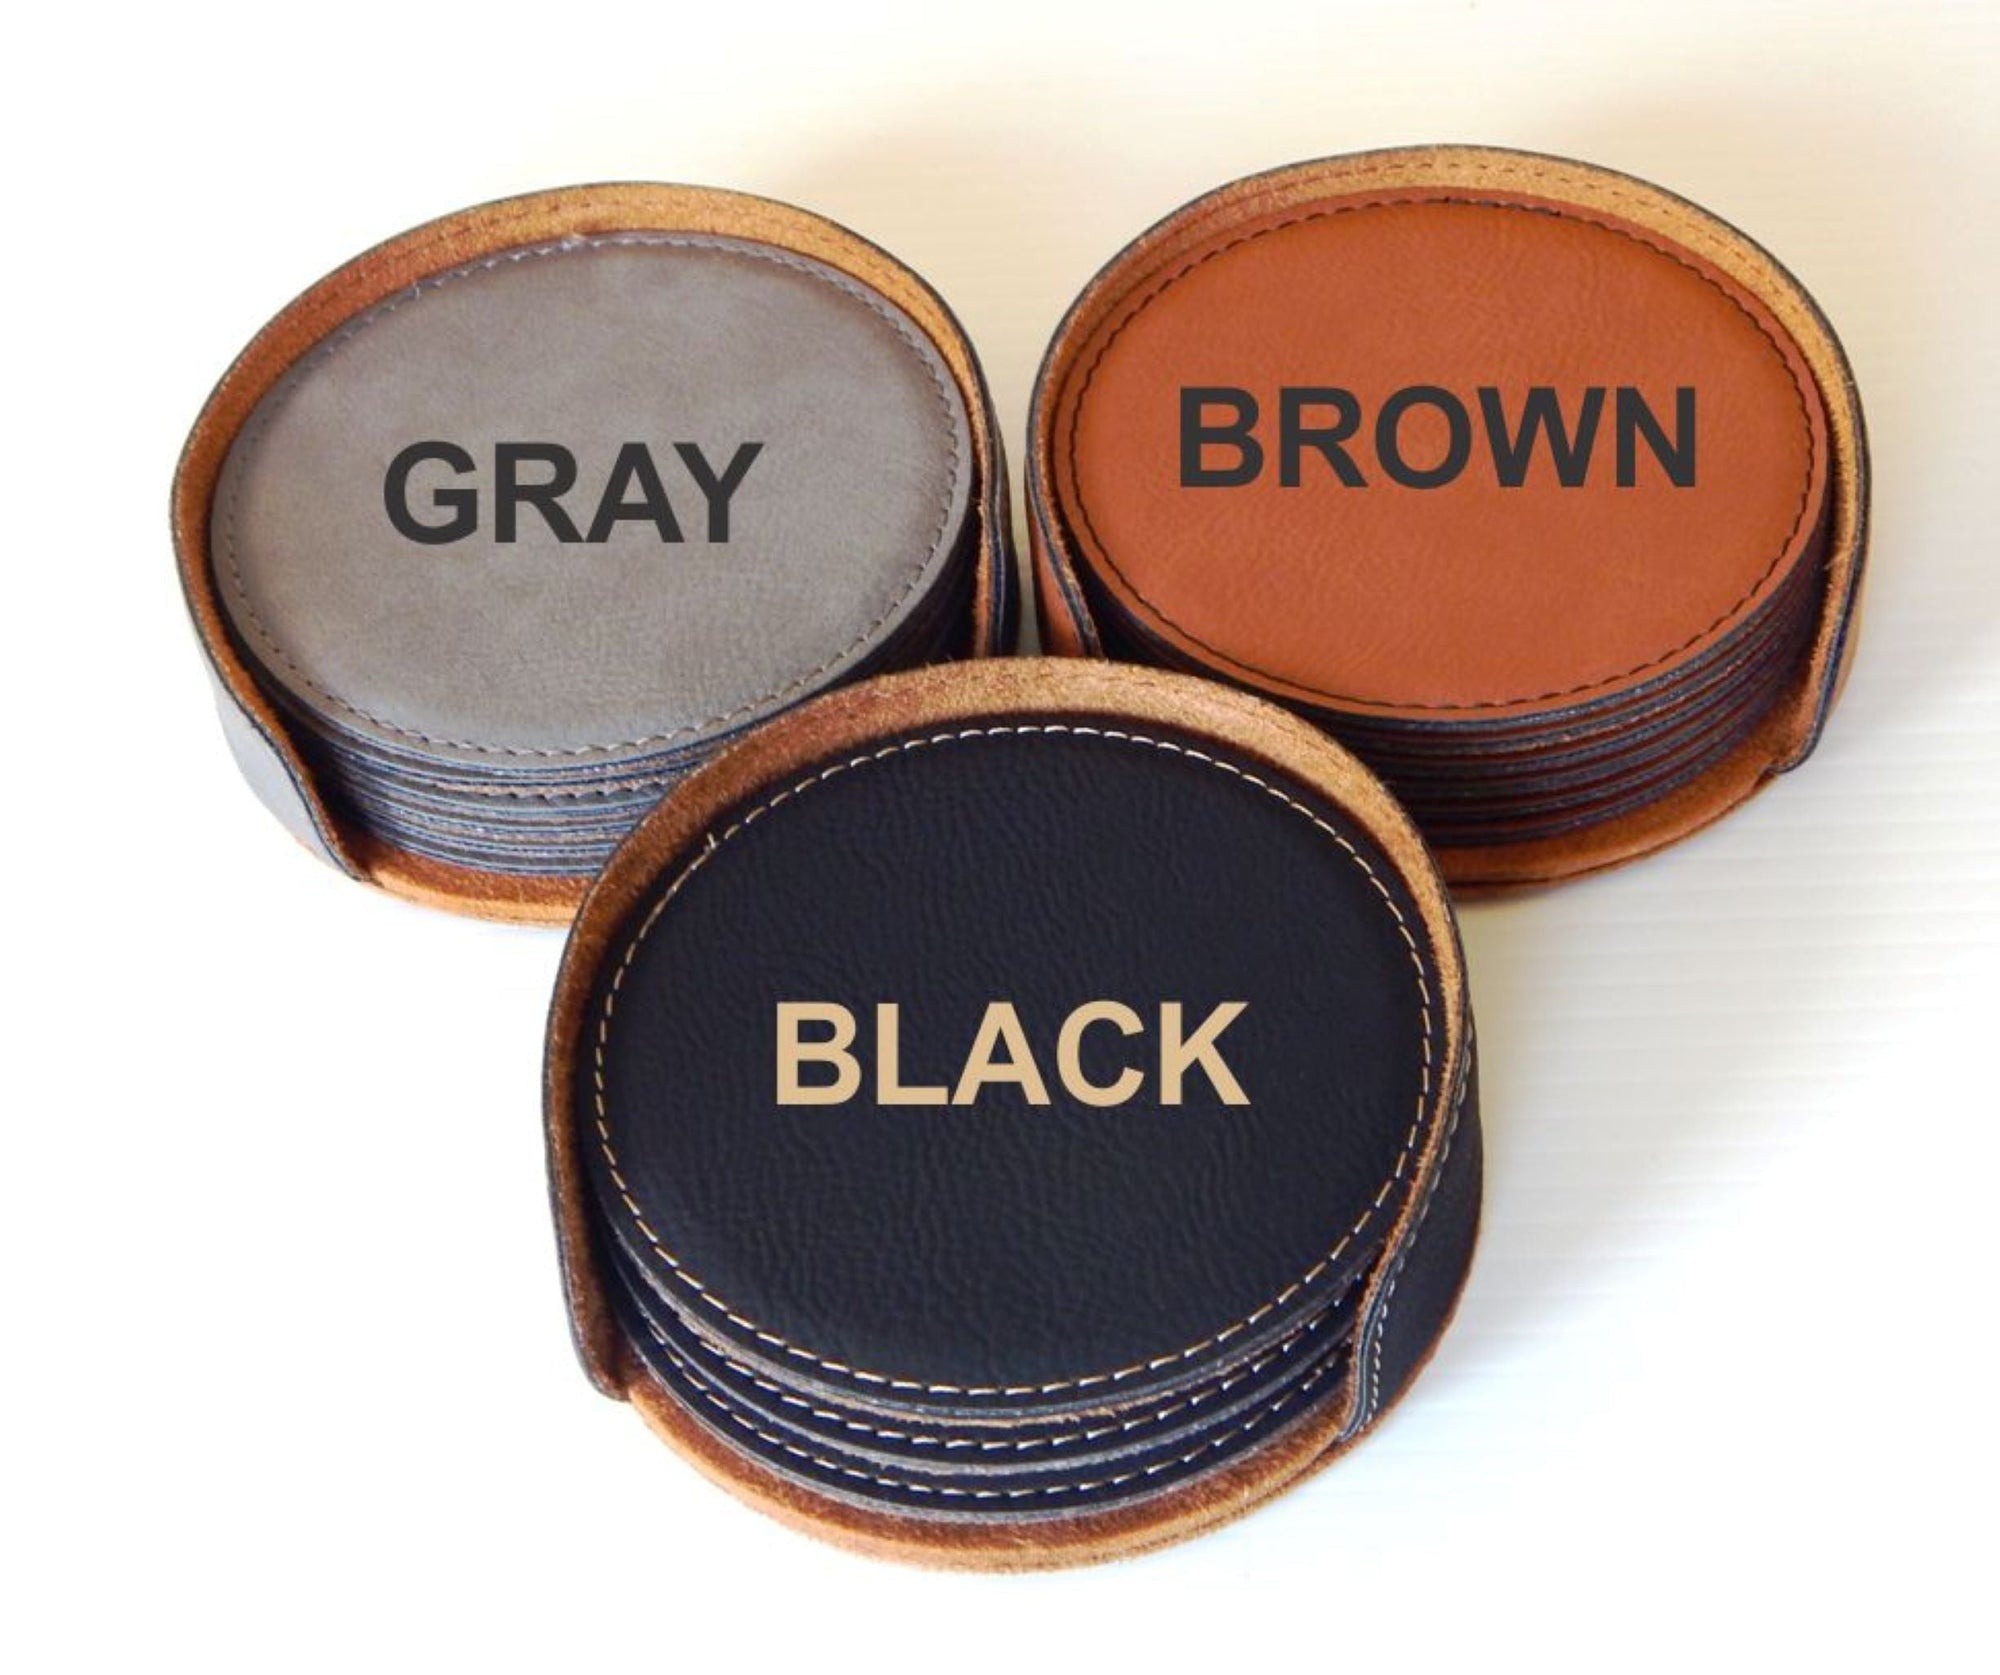 New Home Housewarming Gift | Personalized Gift for Couple | Leather Coasters